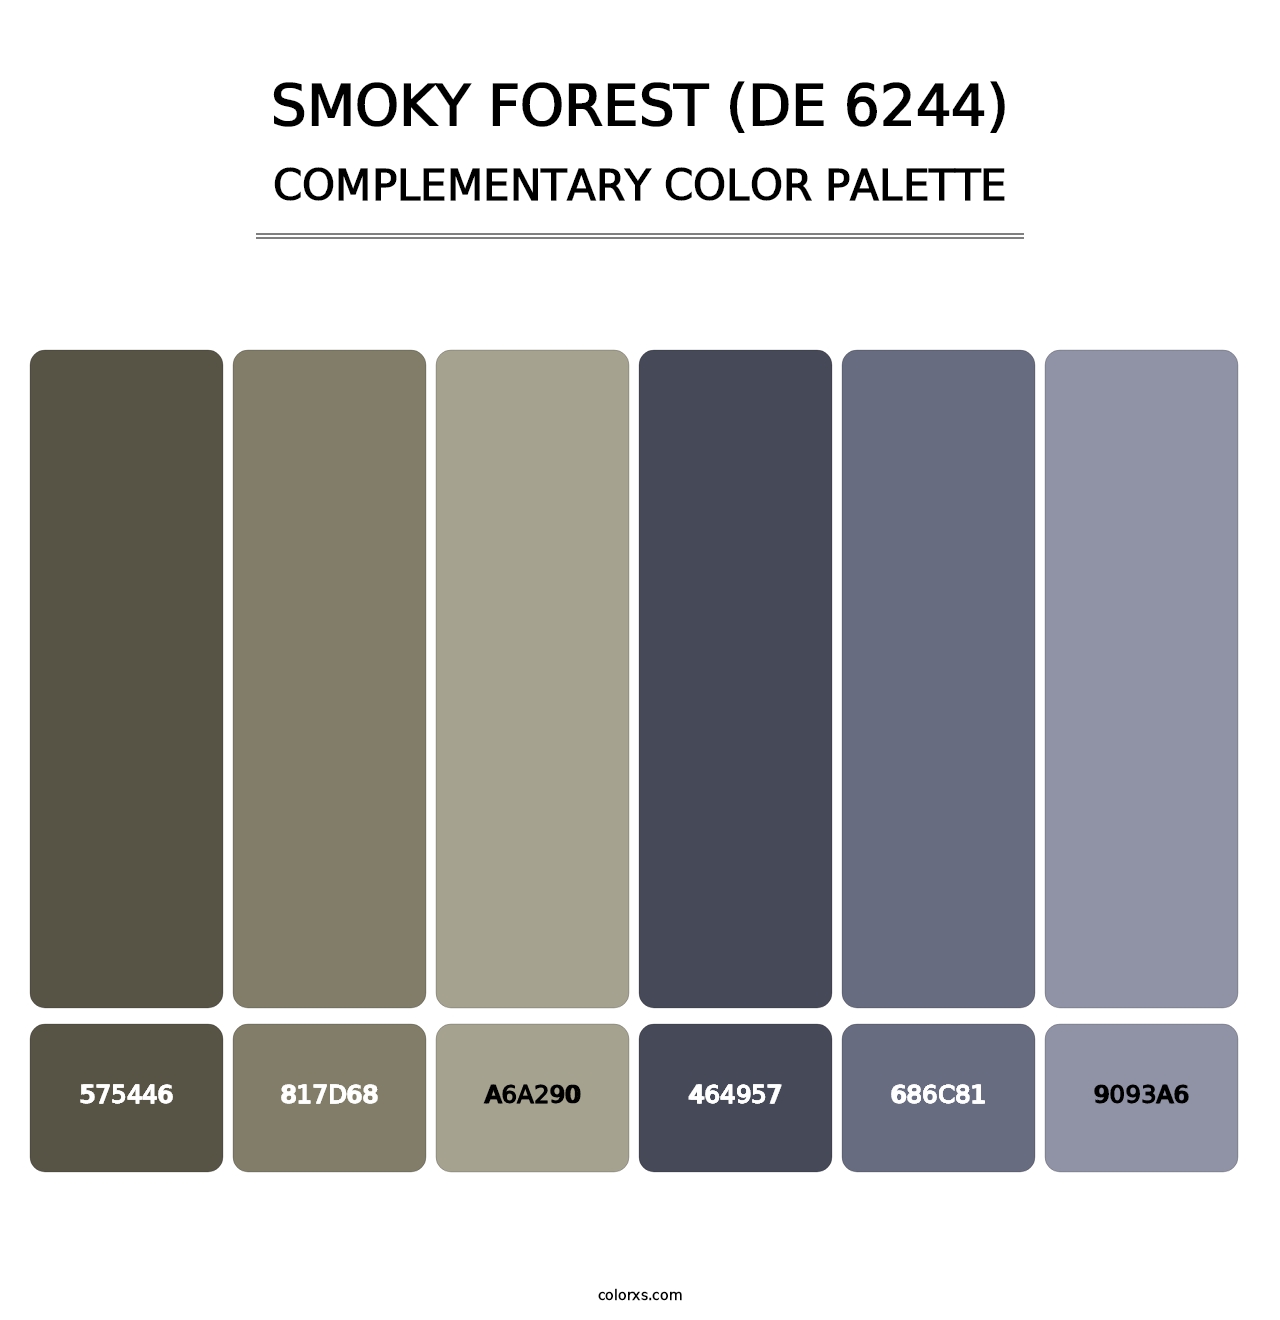 Smoky Forest (DE 6244) - Complementary Color Palette